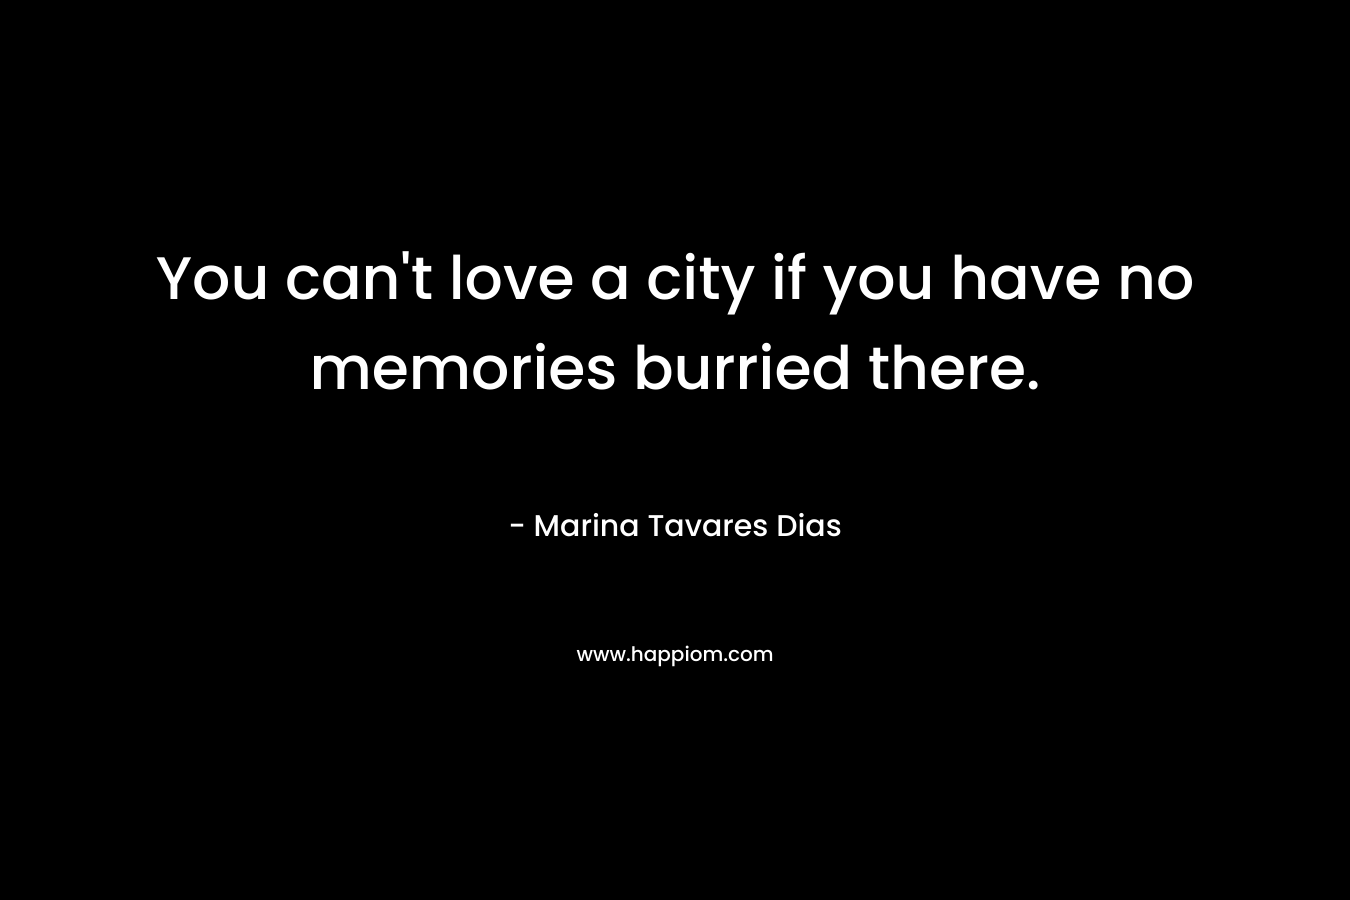 You can’t love a city if you have no memories burried there. – Marina Tavares Dias